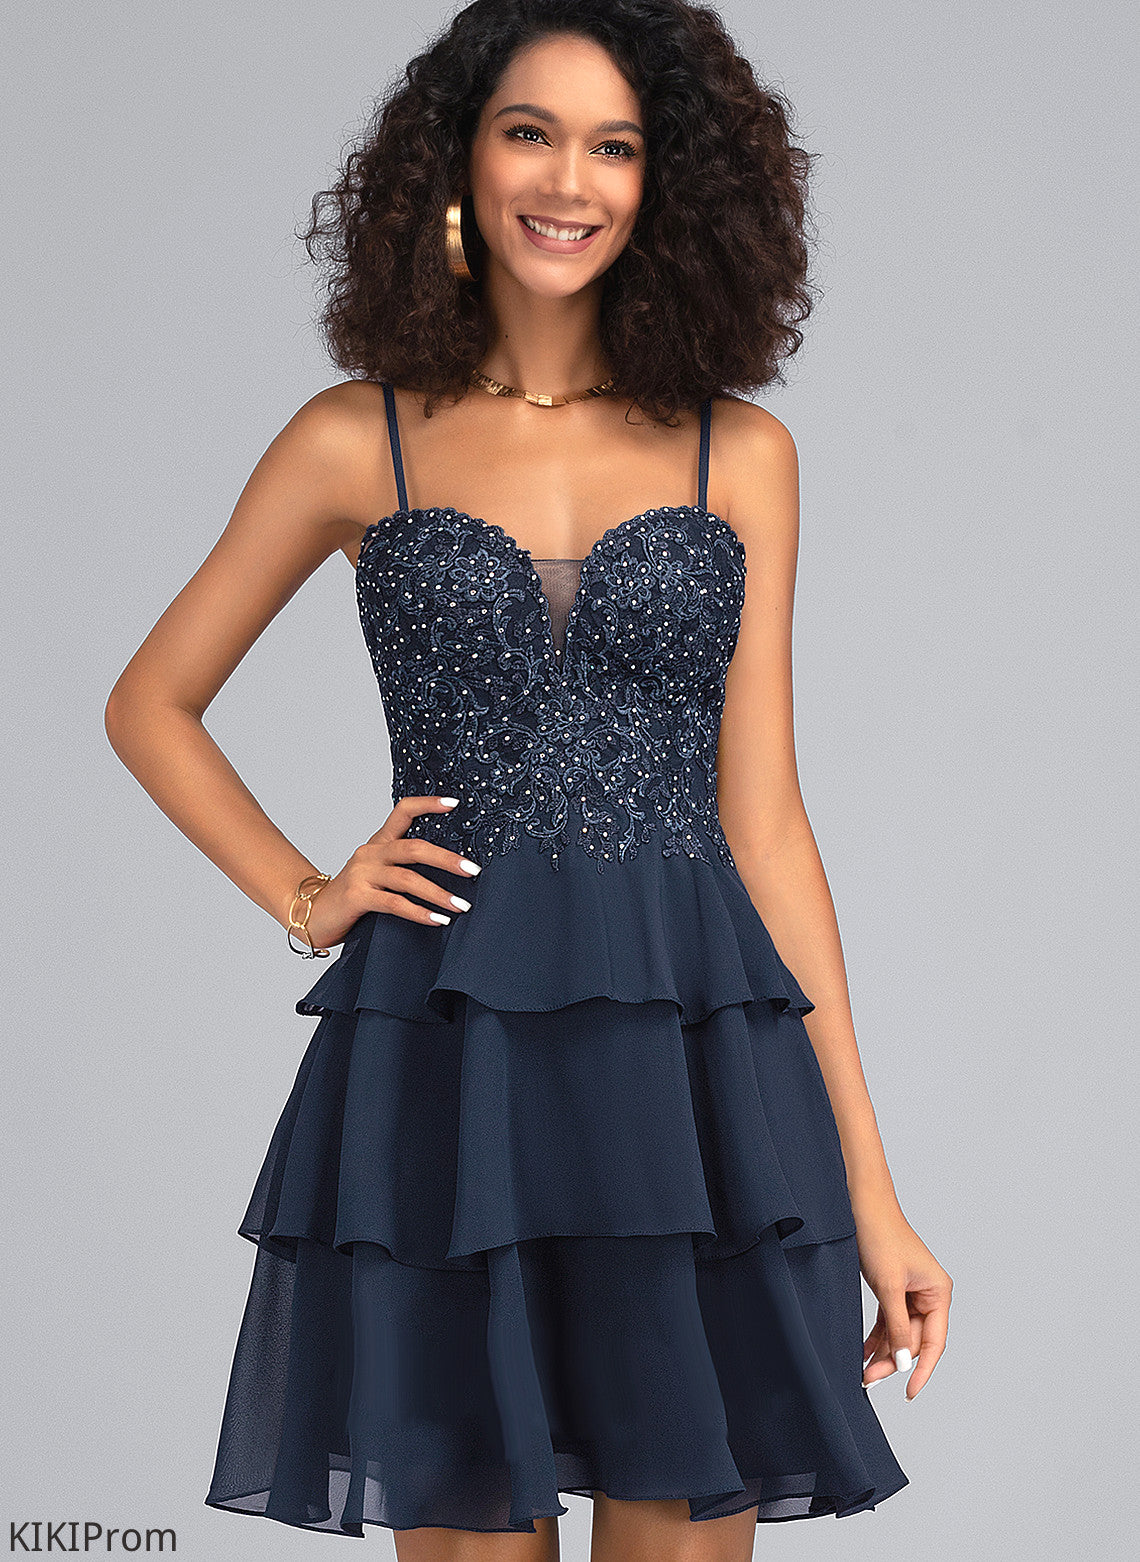 Chiffon Homecoming Dresses Beading Nathaly Sweetheart Short/Mini A-Line Homecoming Dress With Sequins Lace